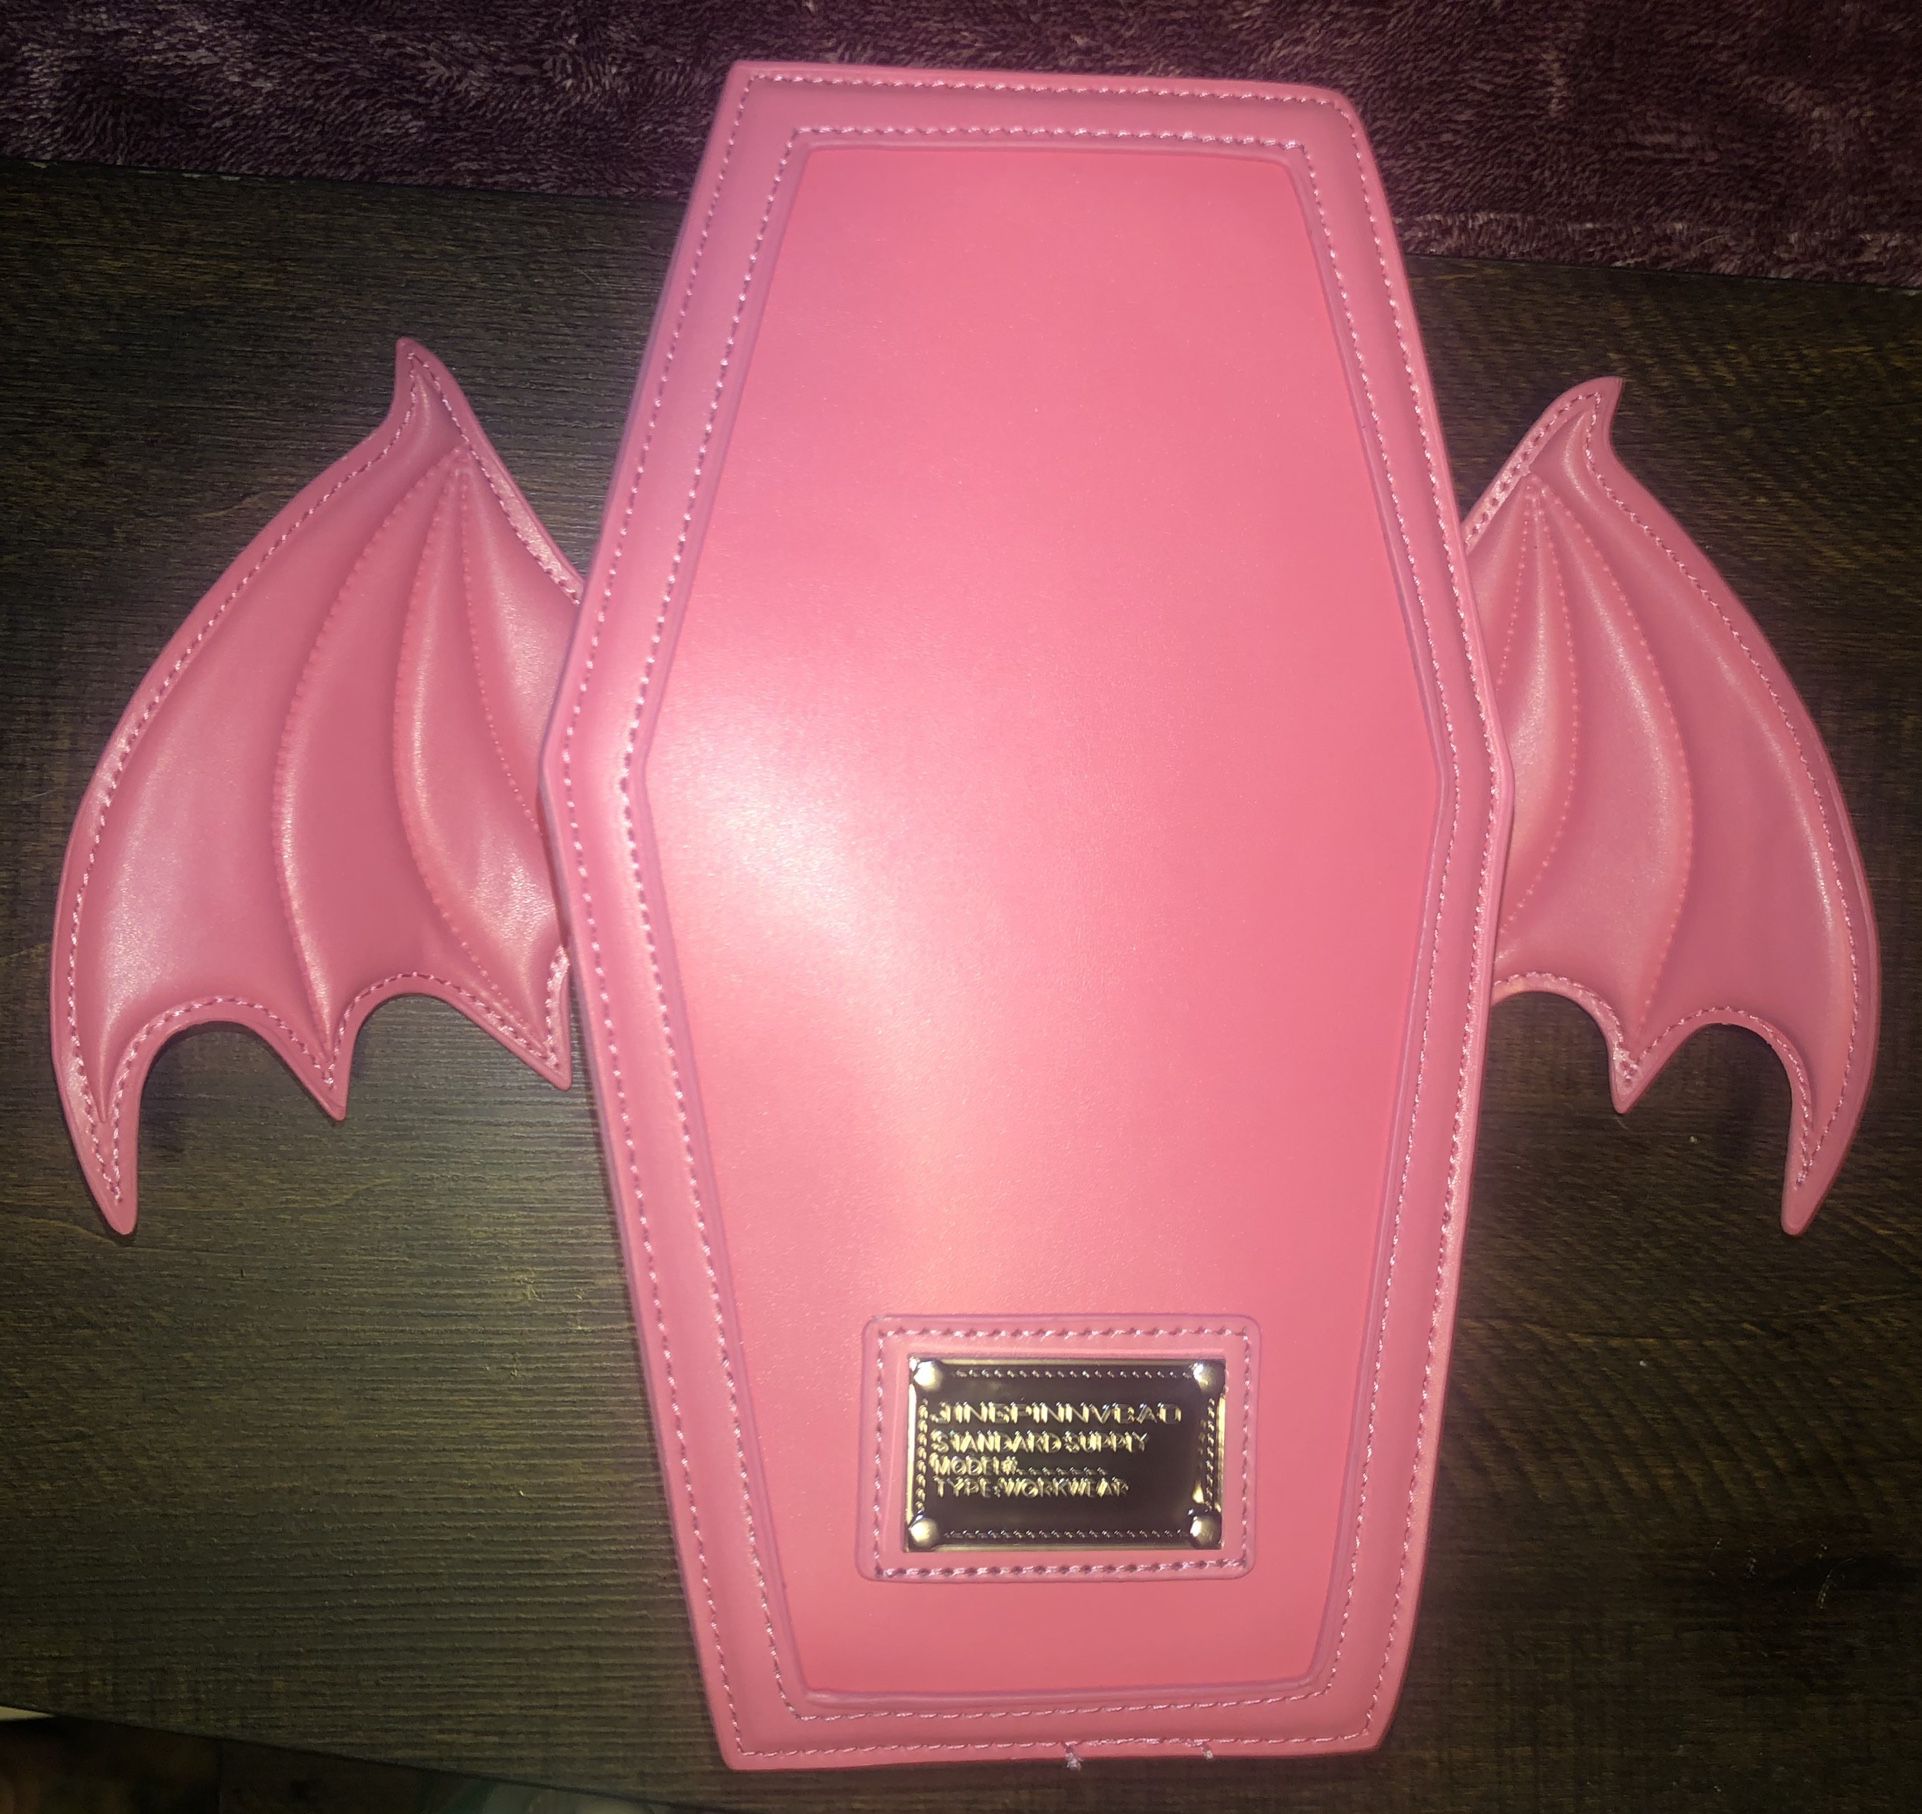 ⚰️ COFFIN / BAT WING 🦇 Purse / Backpack - Hot Pink - Brand New!